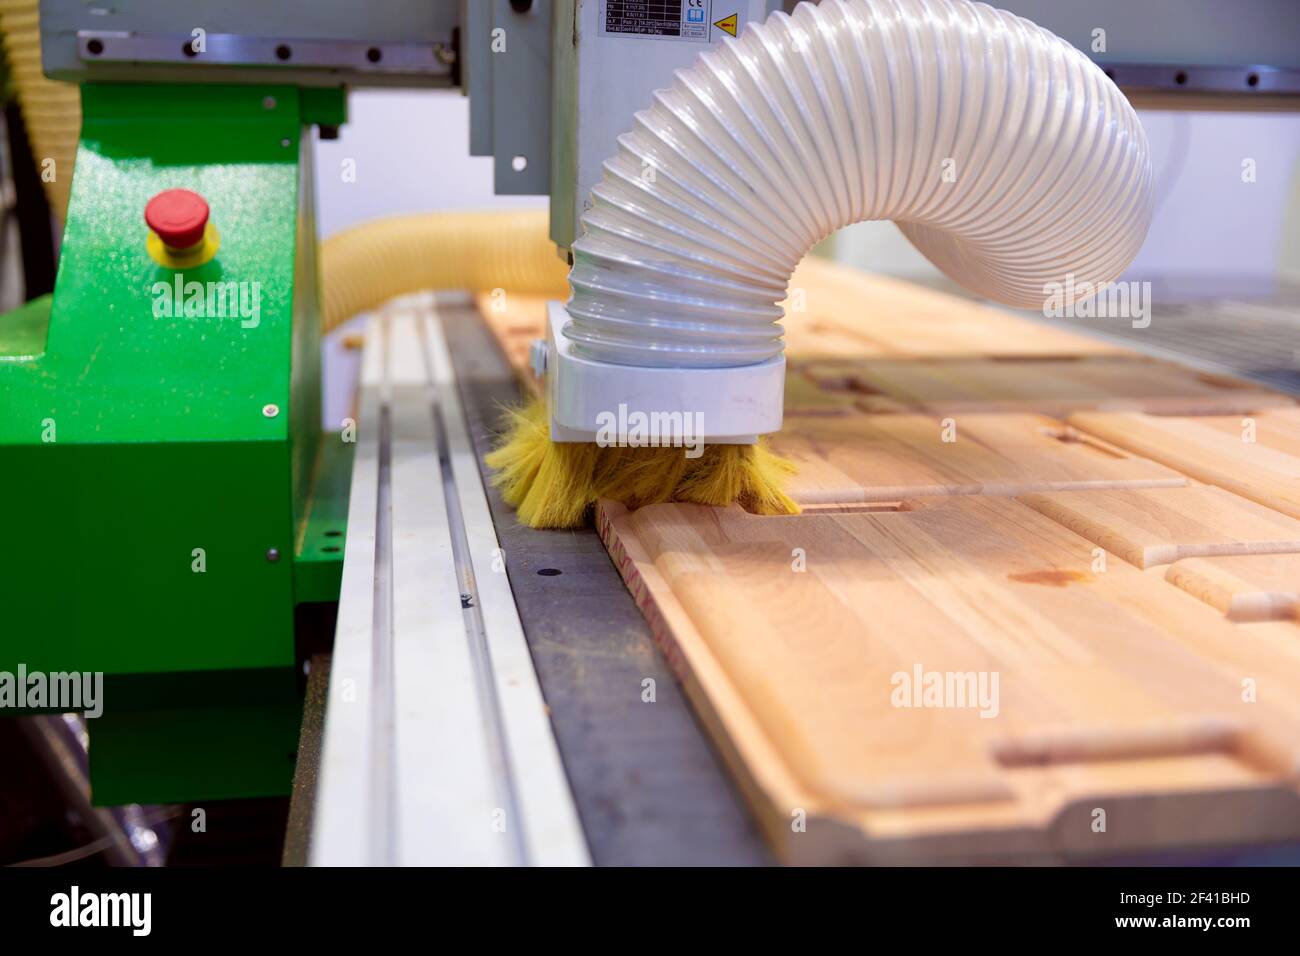 CNC woodworking wood processing machine, modern technology in the industry. Stock Photo